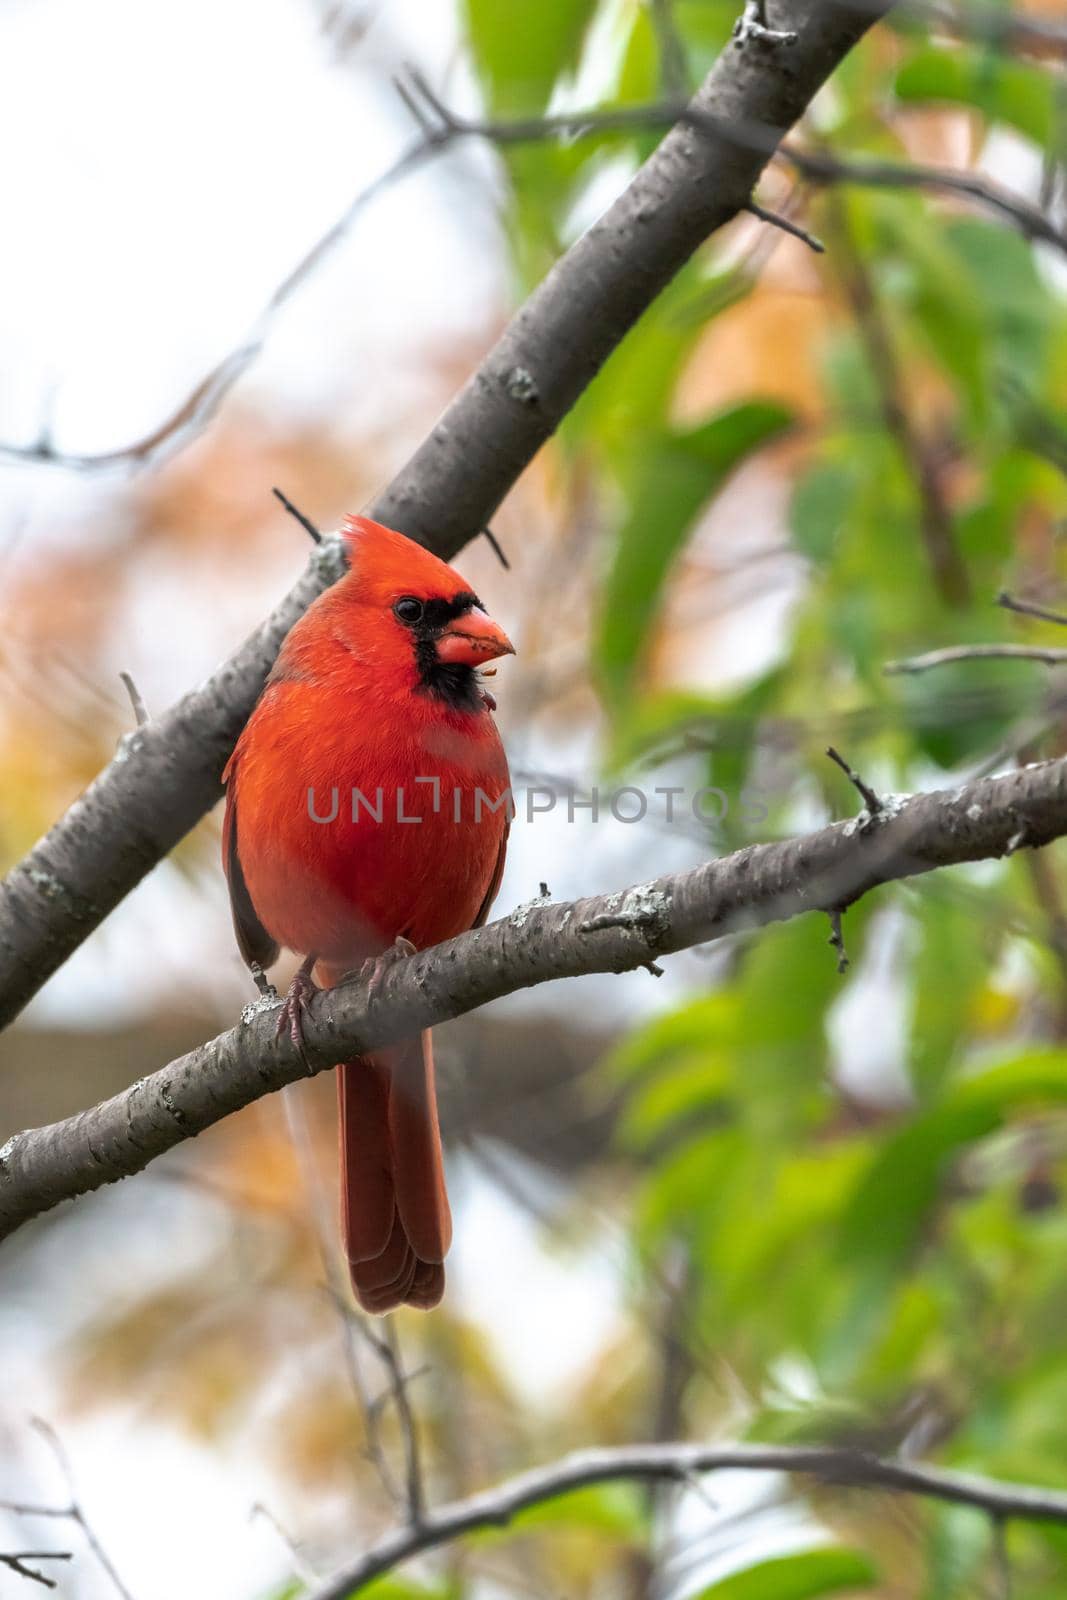 A closeup wildlife bird photograph of an adult male Northern Cardinal perched on a tree branch in the forest in the Midwest.